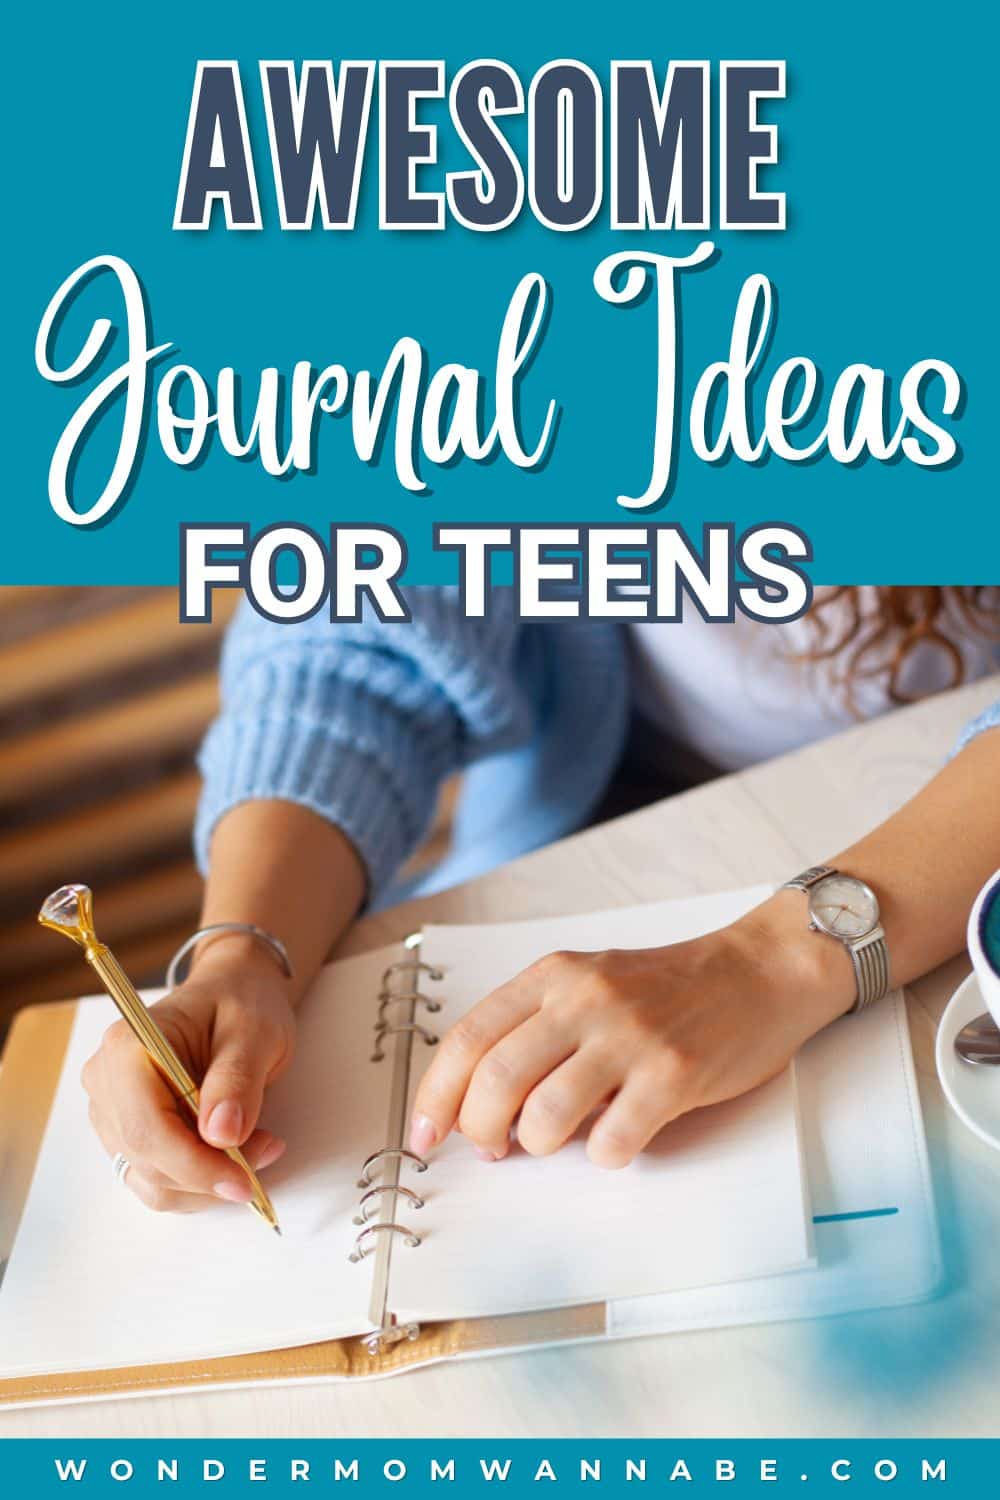 A person writing in a journal with the text "journal ideas for teens" displayed above.